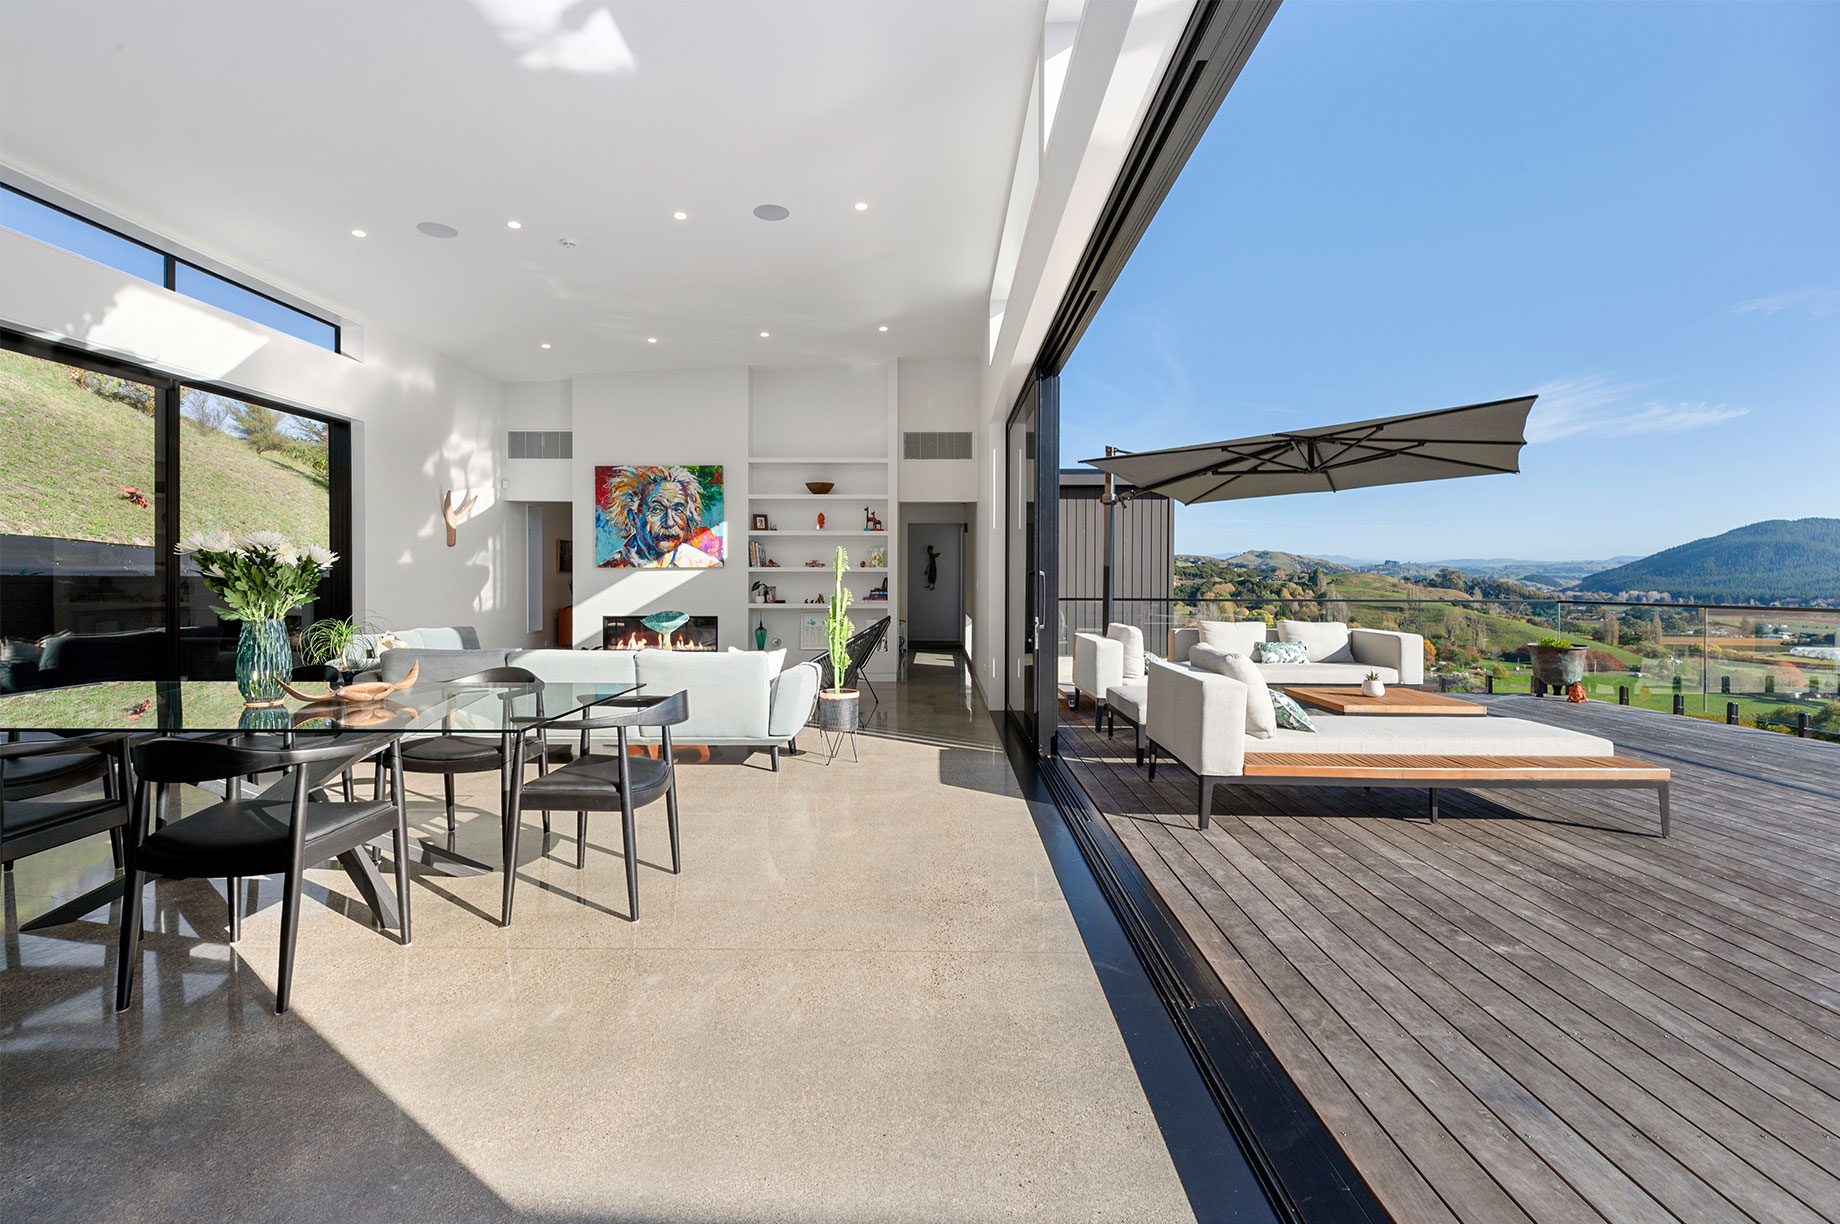 Indoor-outdoor living flow with a hill view